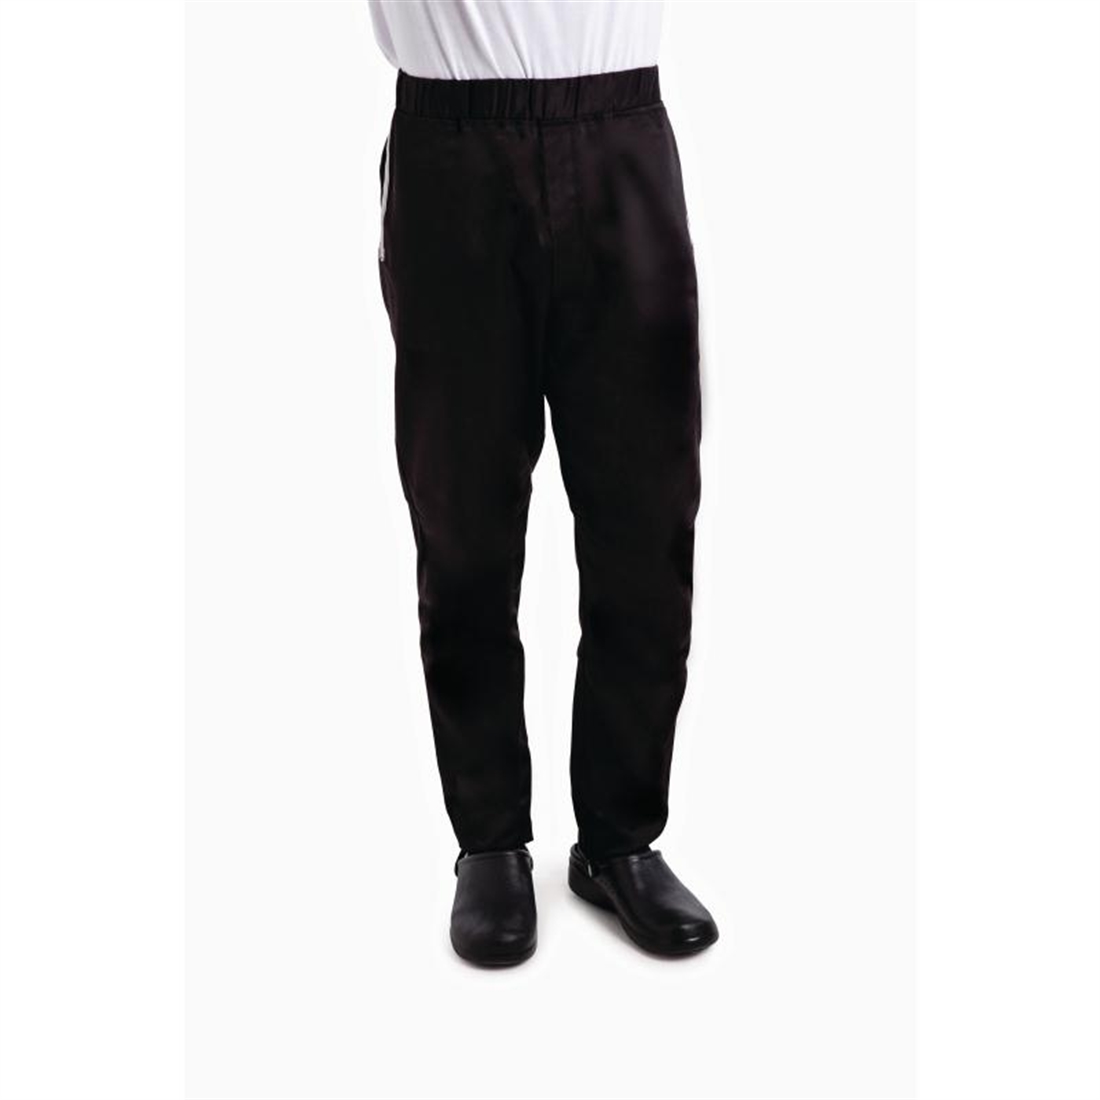 Whites Southside Chefs Utility Trousers Black XS